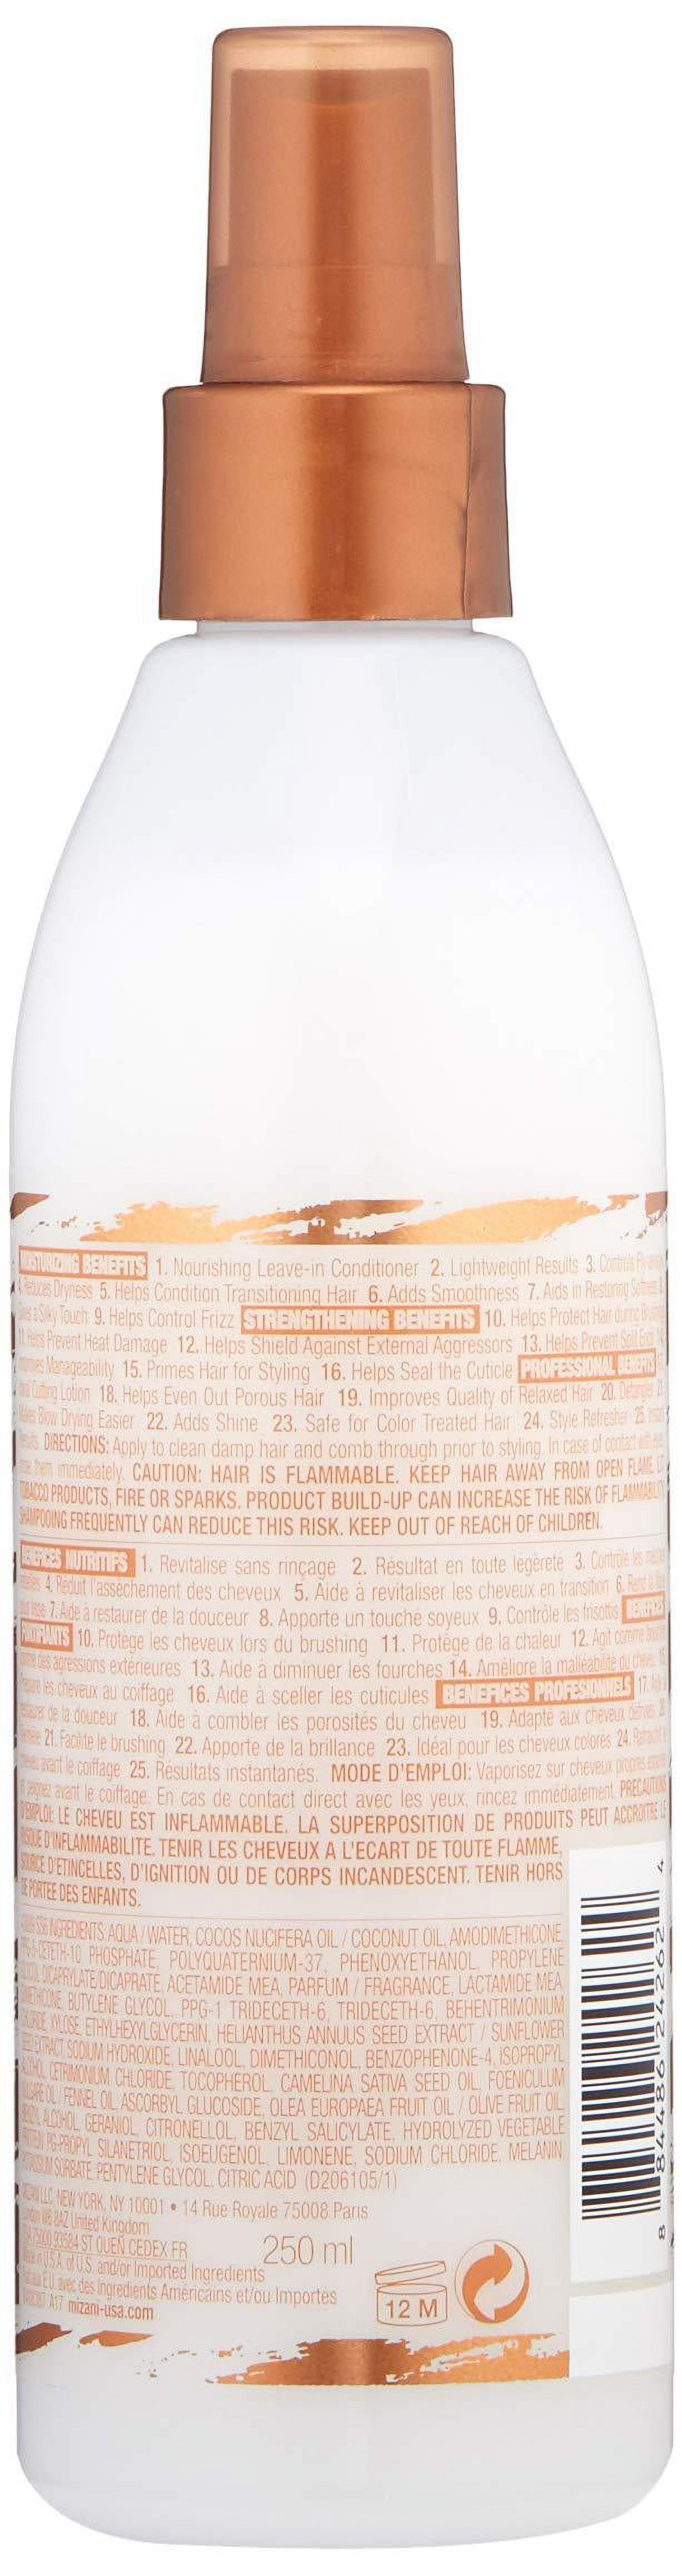 Mizani 25 Miracle Milk Leave In Conditioner, 8.5 Fluid Ounce - image 3 of 10